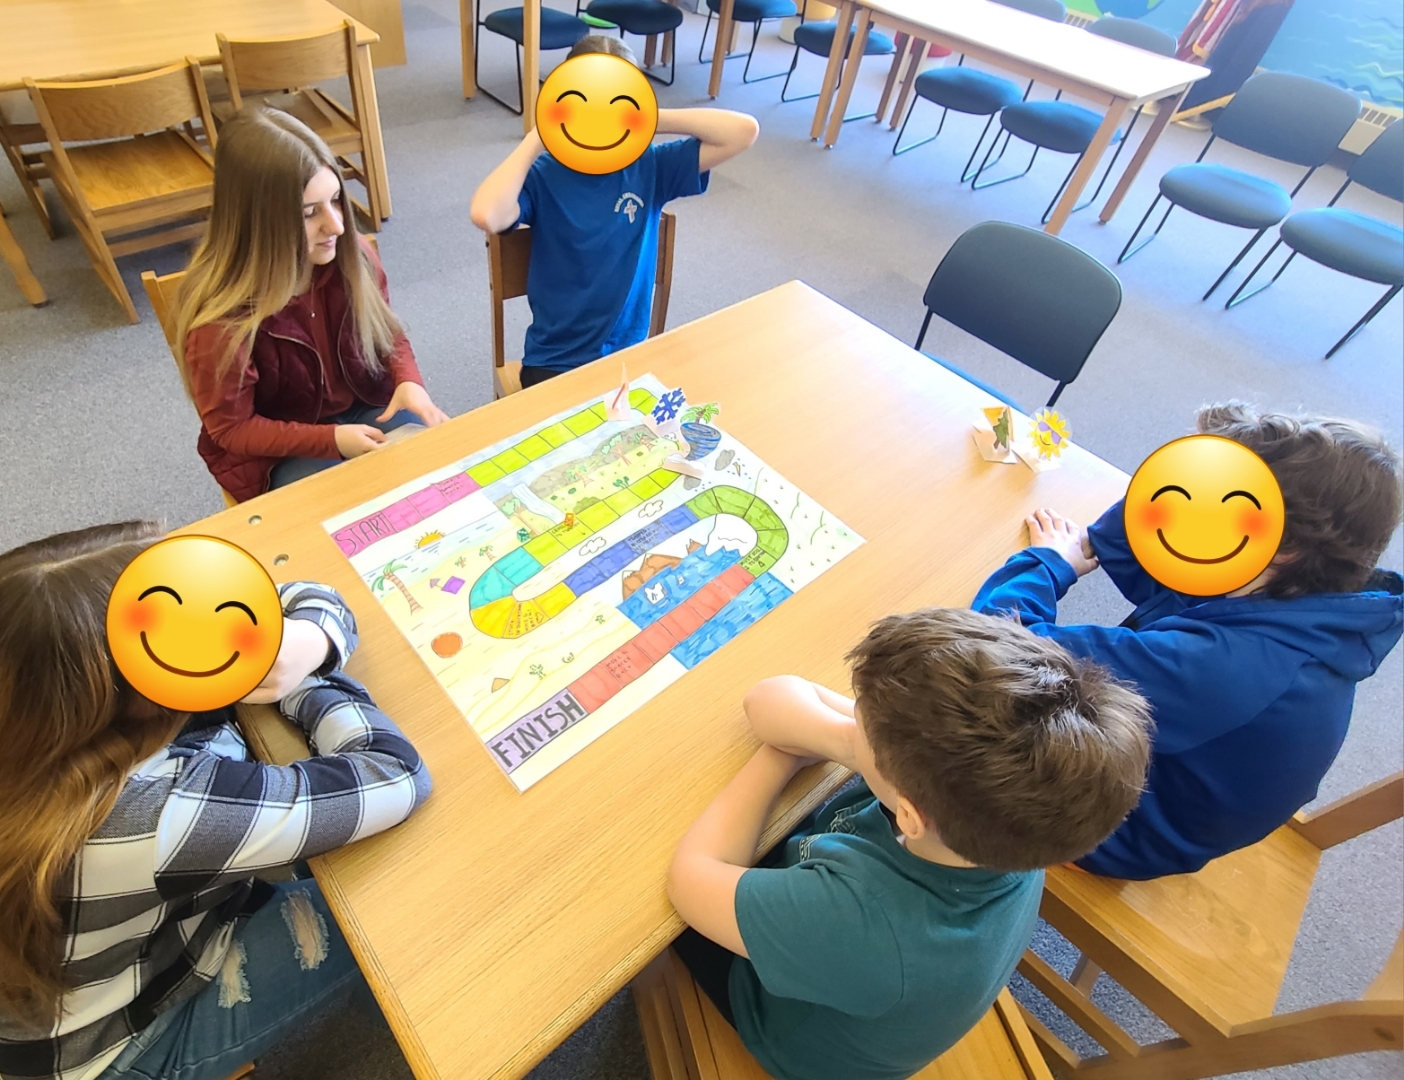 HS student teaching a game to younger students